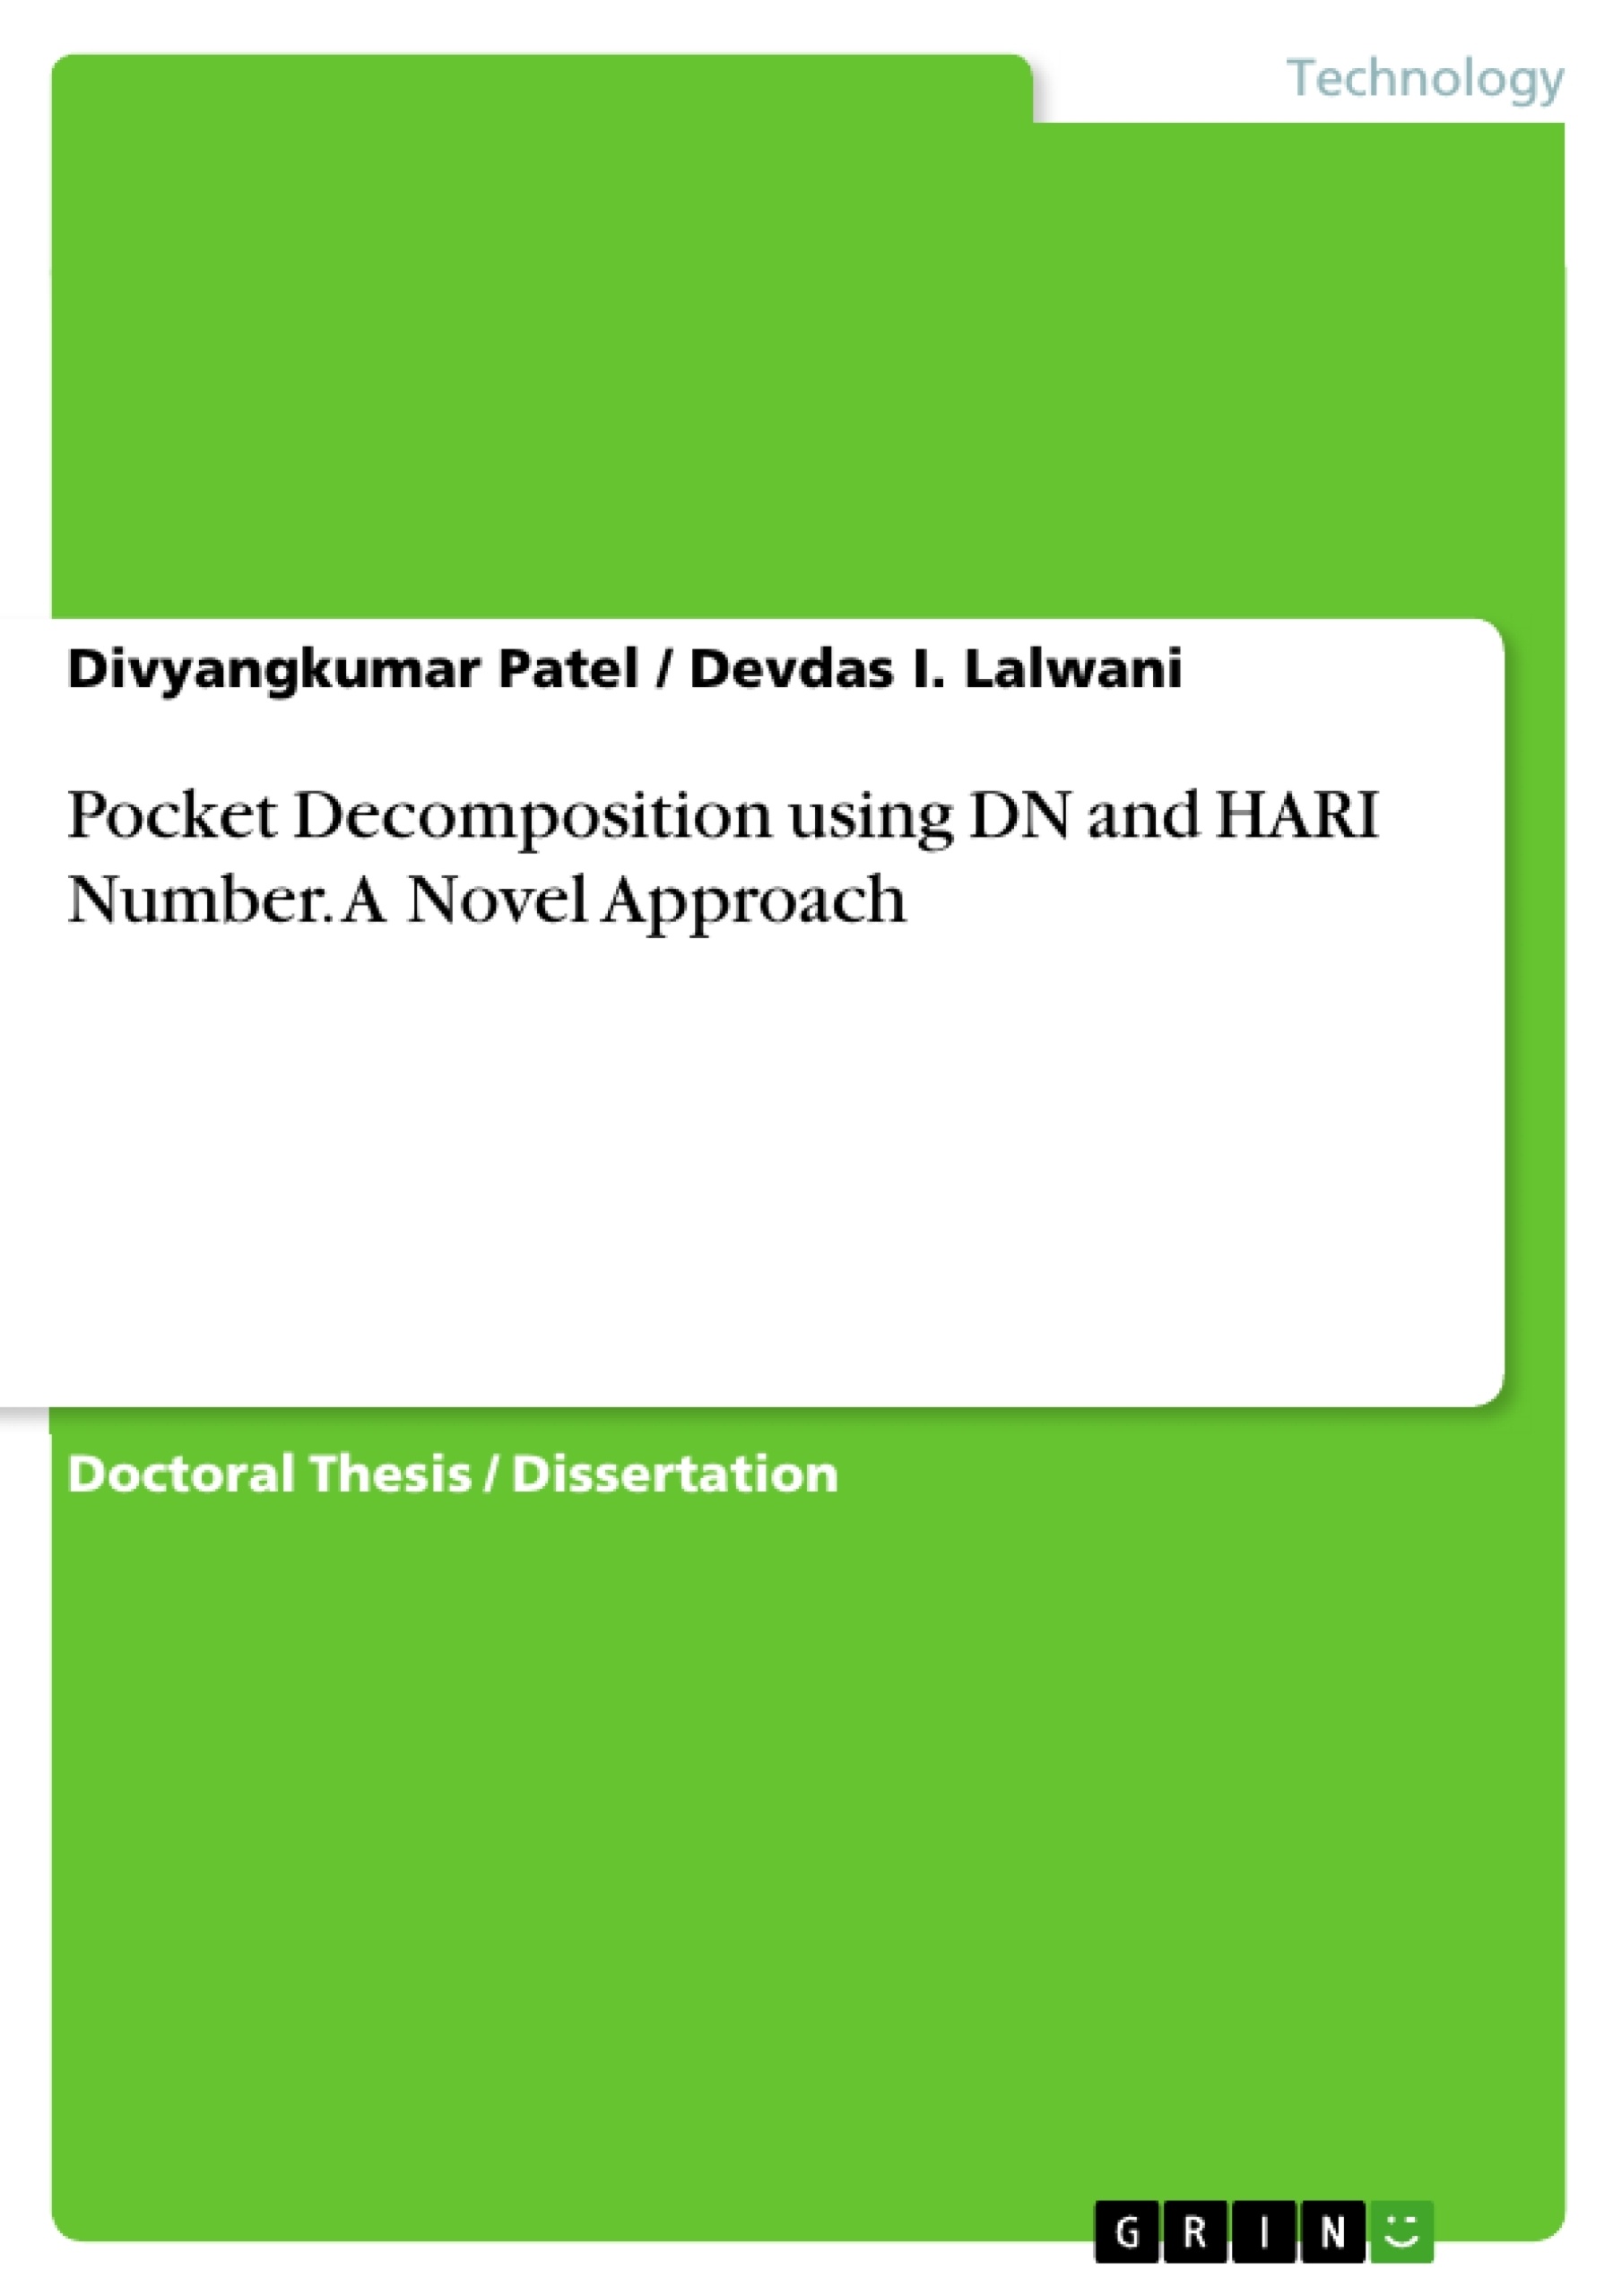 Title: Pocket Decomposition using DN and HARI Number. A Novel Approach